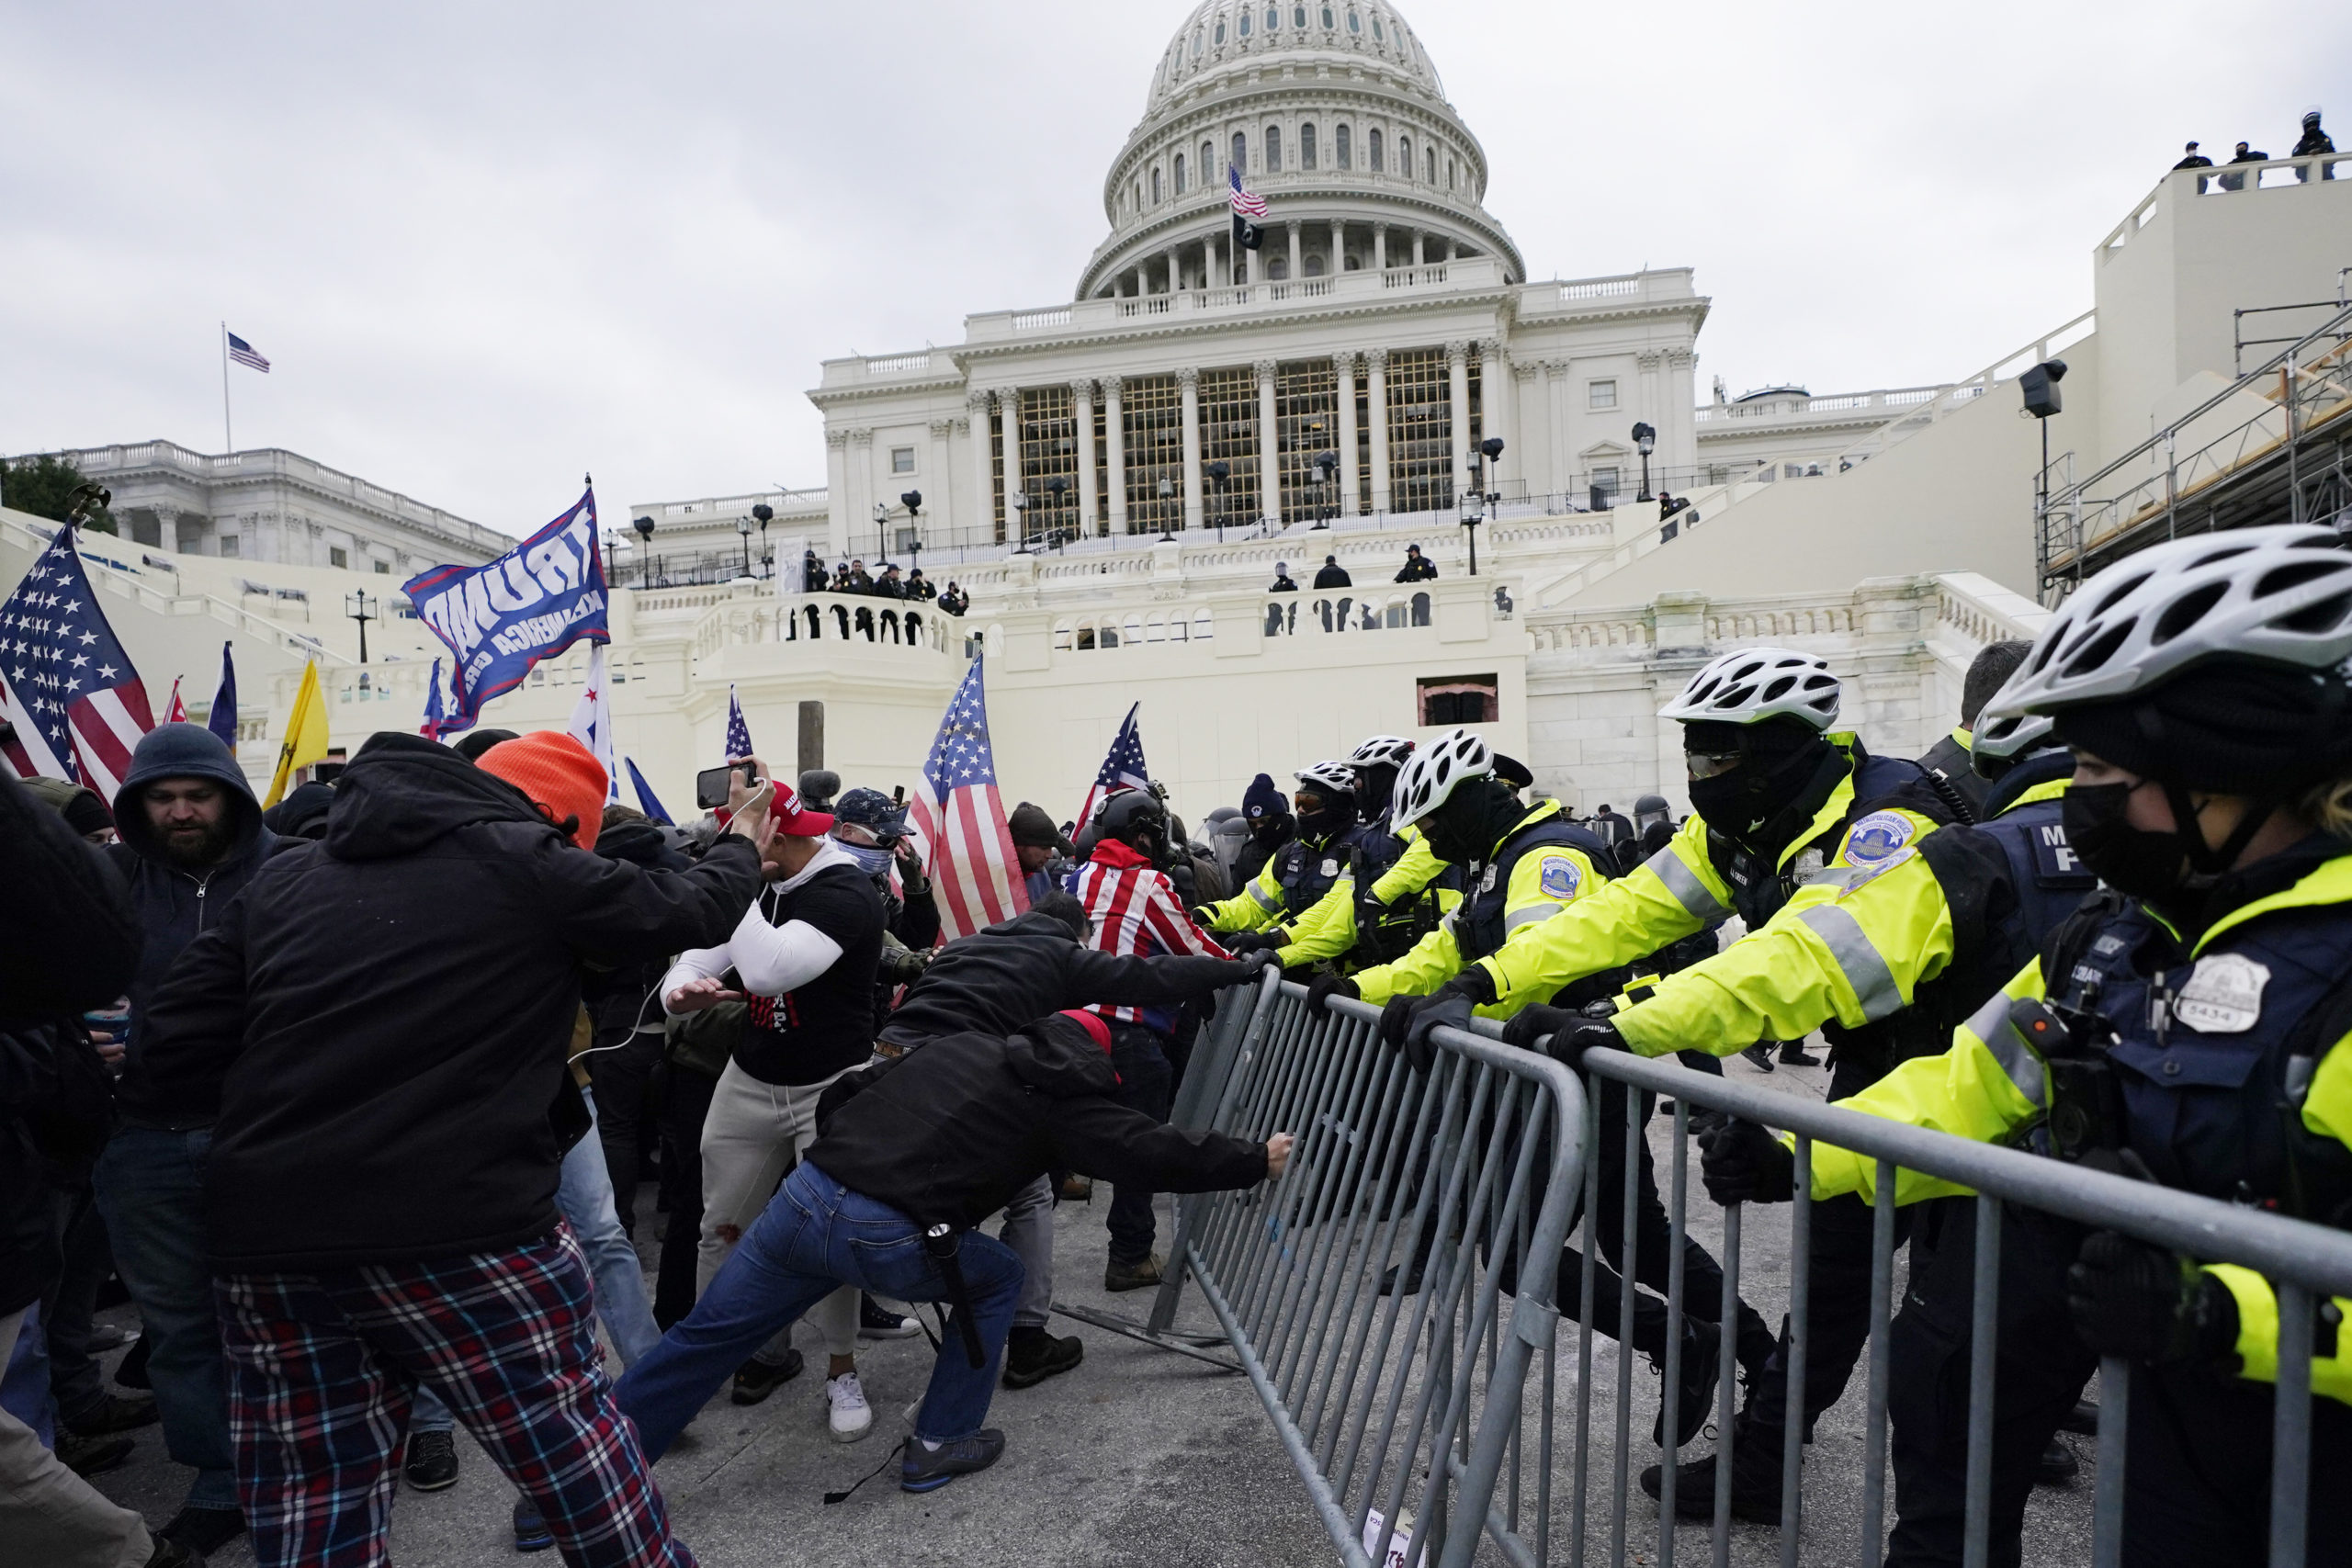 Capitol Police battle rioters outside the Capitol on Jan. 6, 2021.